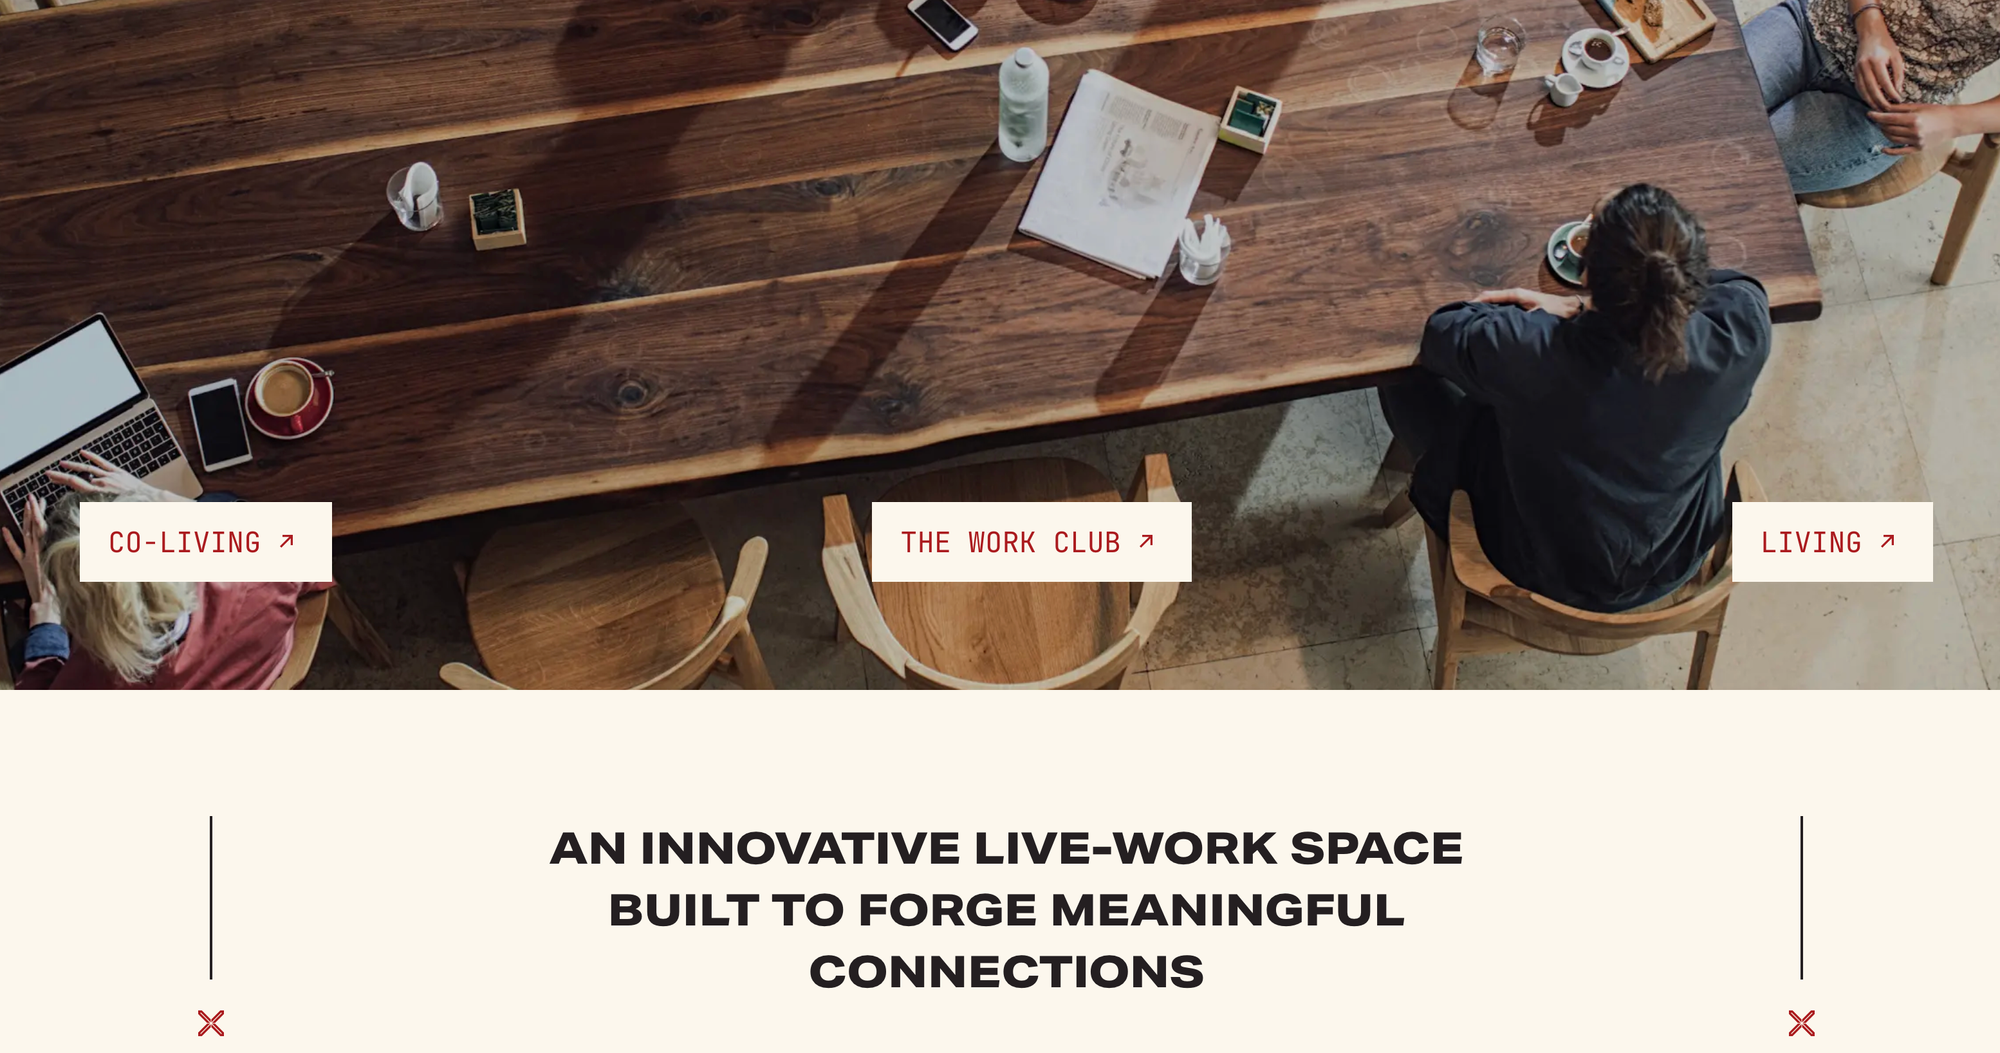 An image of marketing material from Salt Lake Crossing. It reads: "An innovative live-work space built to forge meaningful connections."